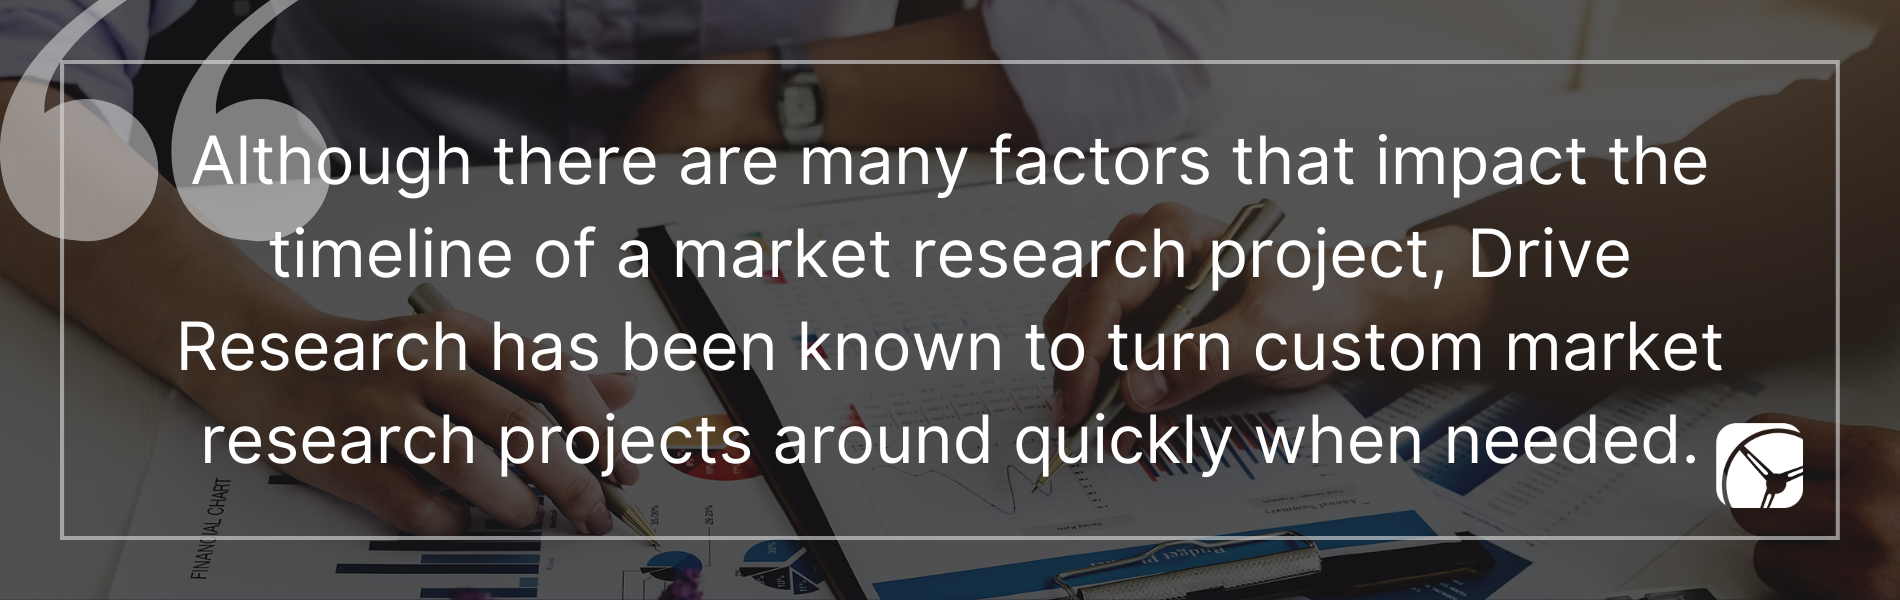 Although each market research project that Drive Research conducts is completely custom to the client and their market research needs, there are typically six key phases Drive Research employs during a market research project.